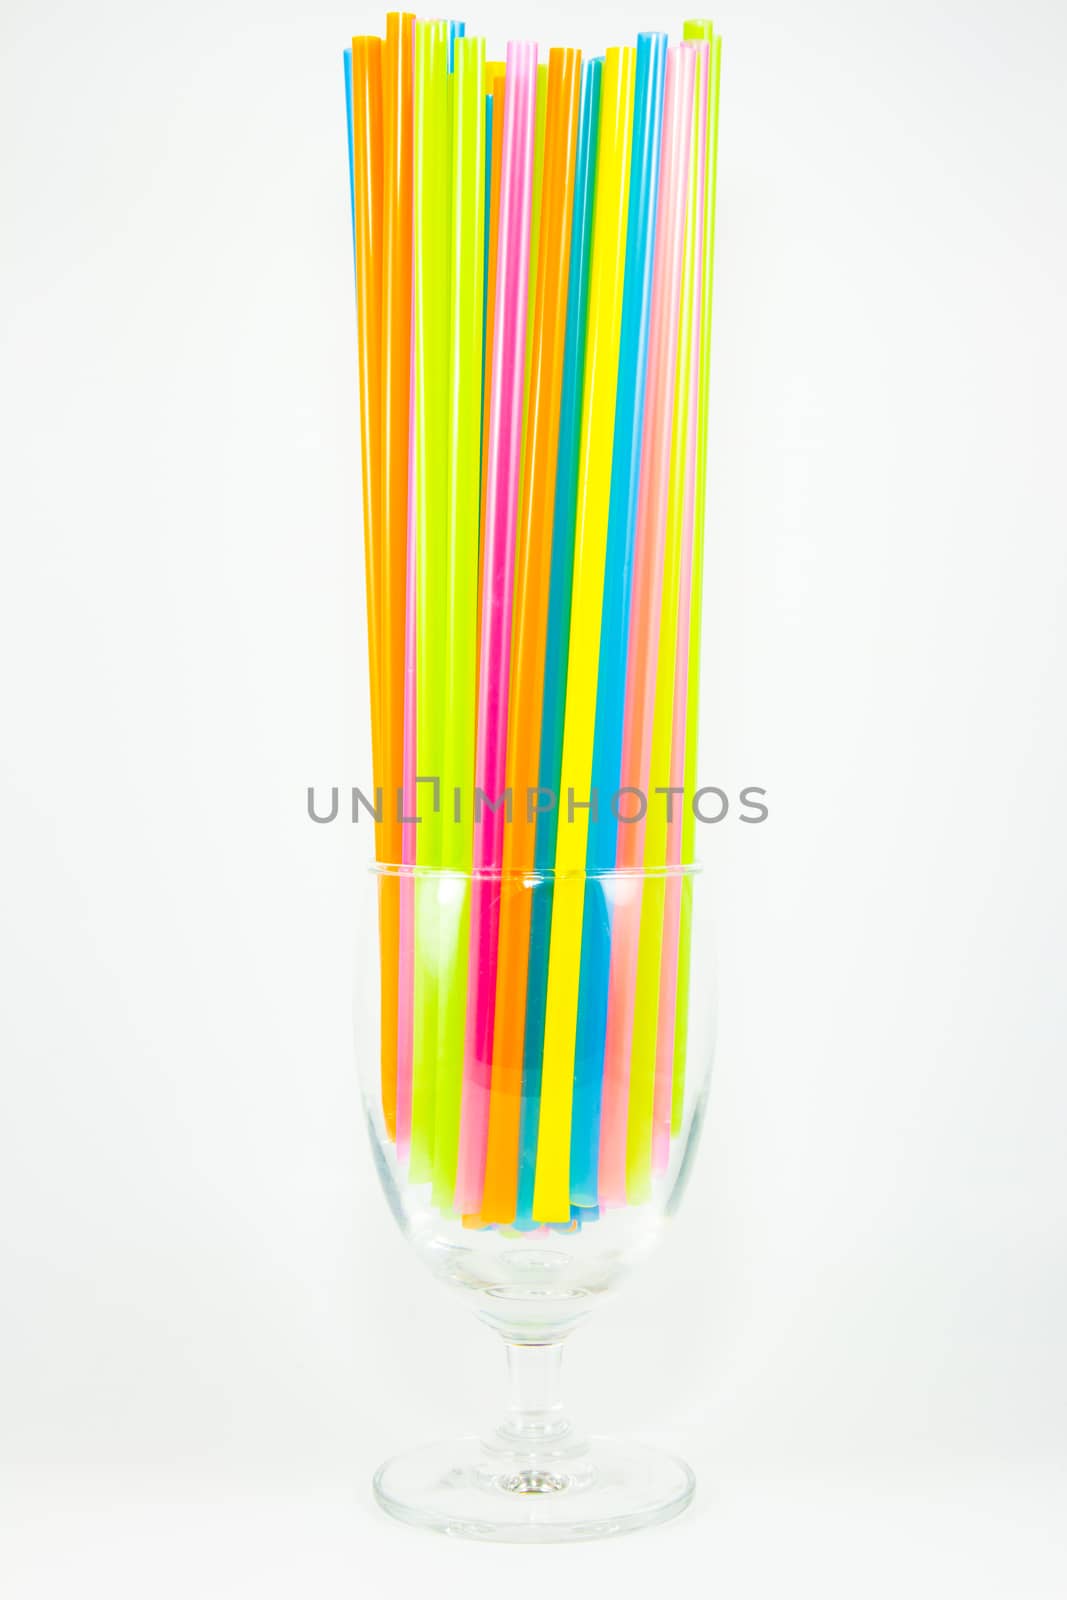 Front view of colorful drinking straws in glass isolated on white background